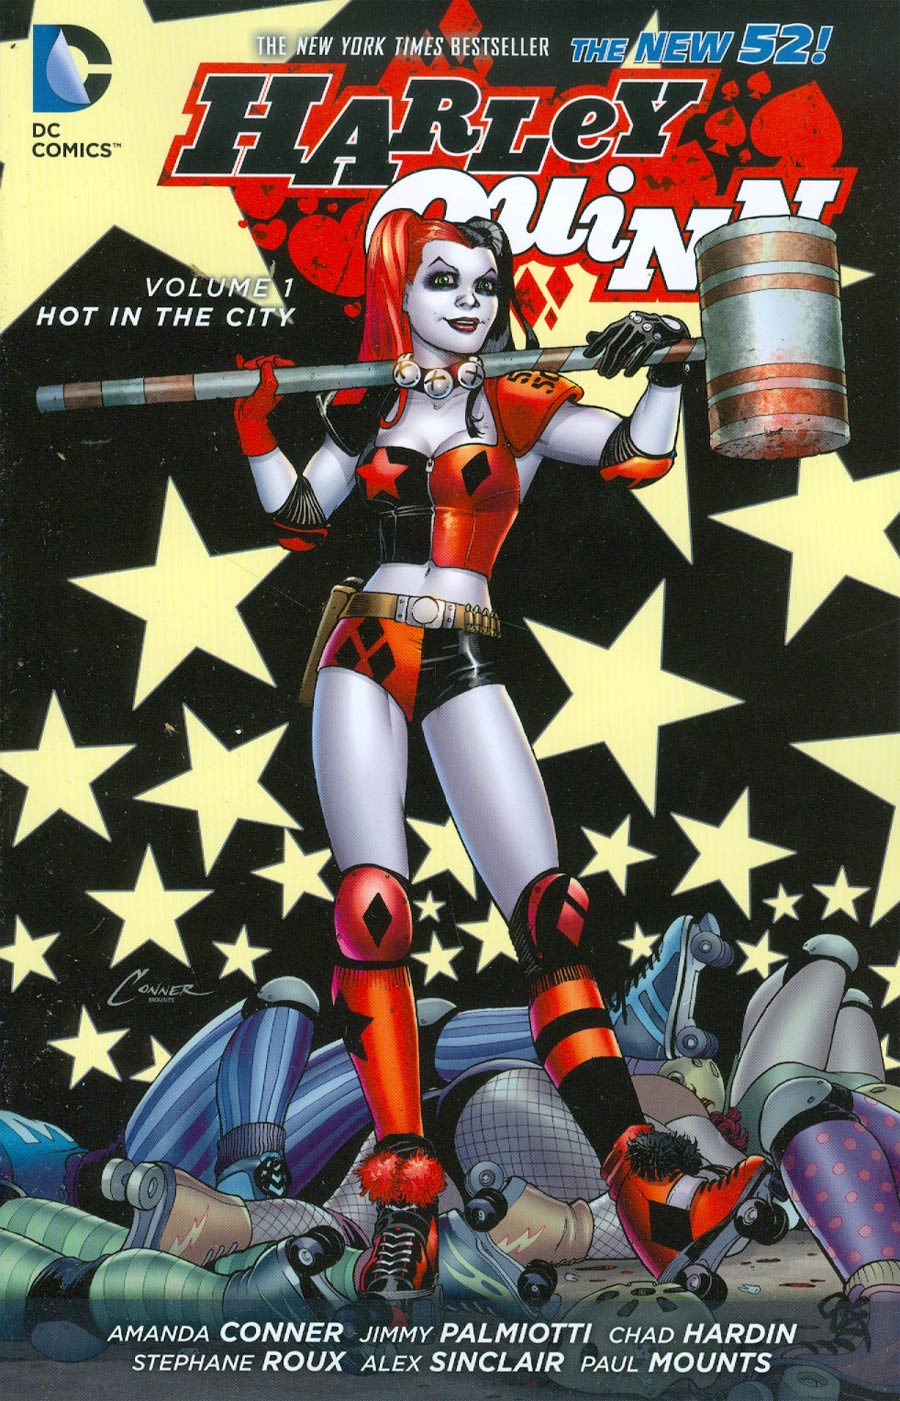 Harley Quinn (New 52) Vol 1 Hot In The City TP